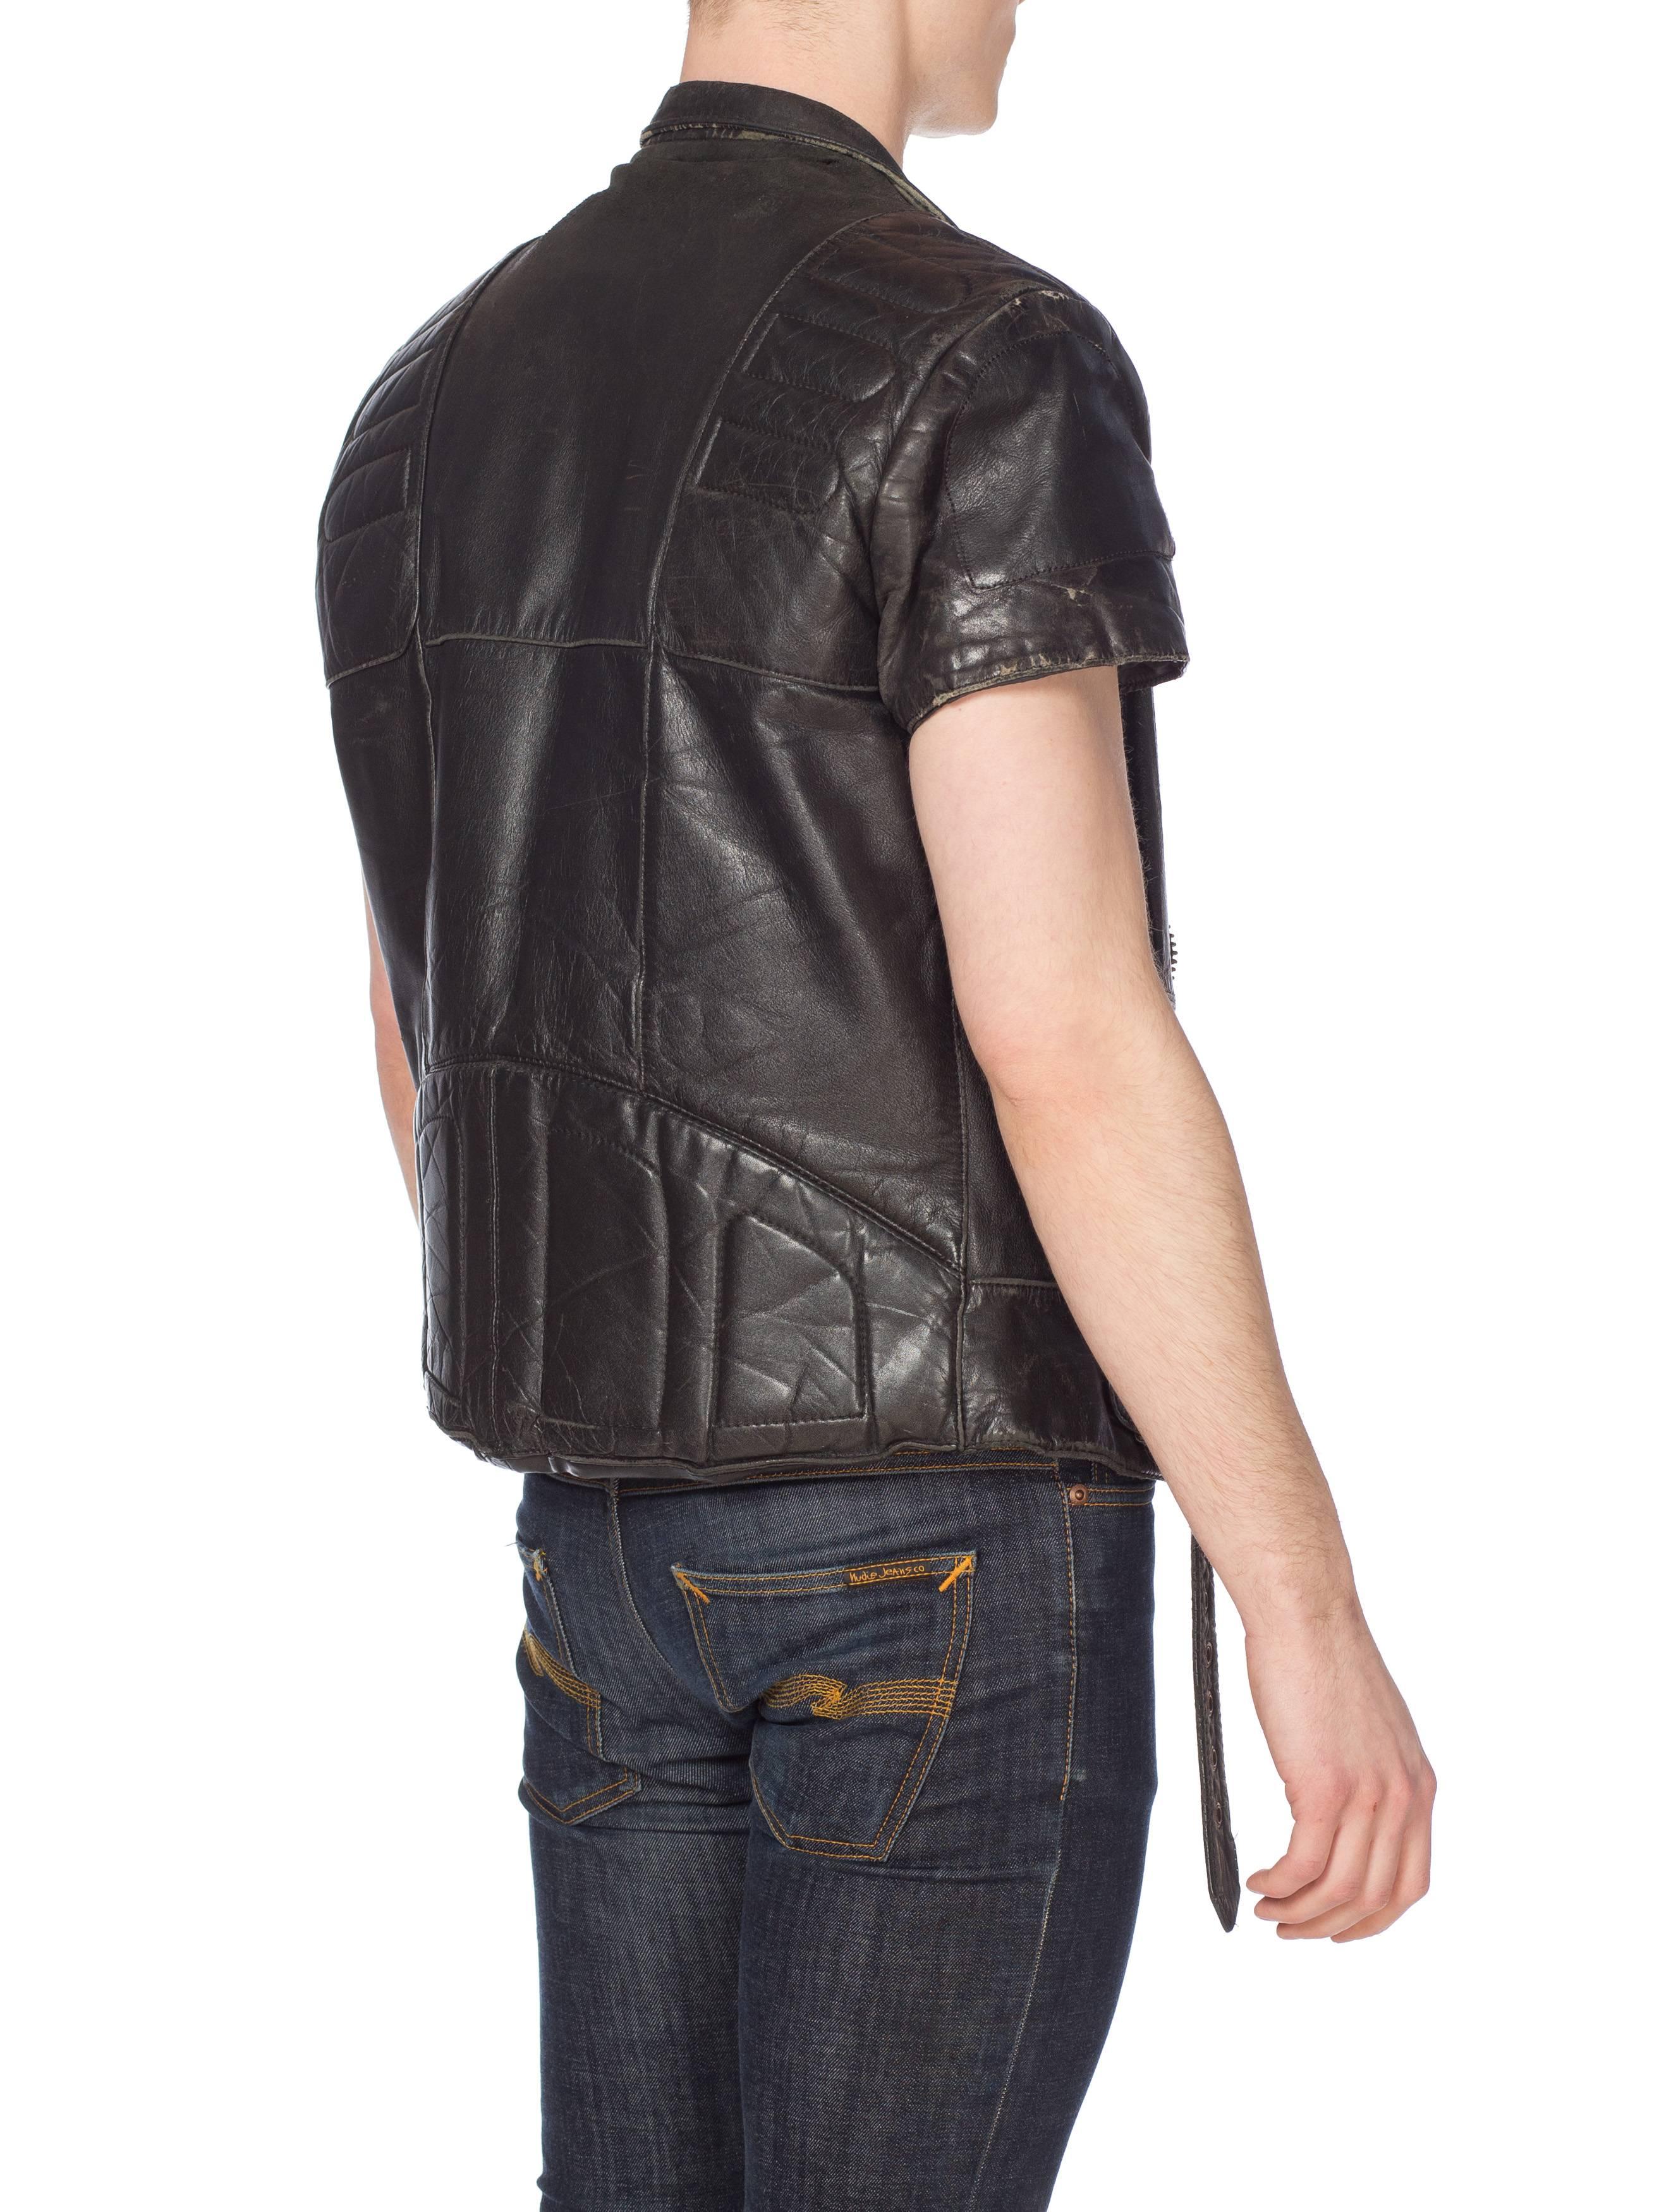 Mens Cropped Sleeve Leather Biker Jacket Formerly Belonging to the Band Justice 6